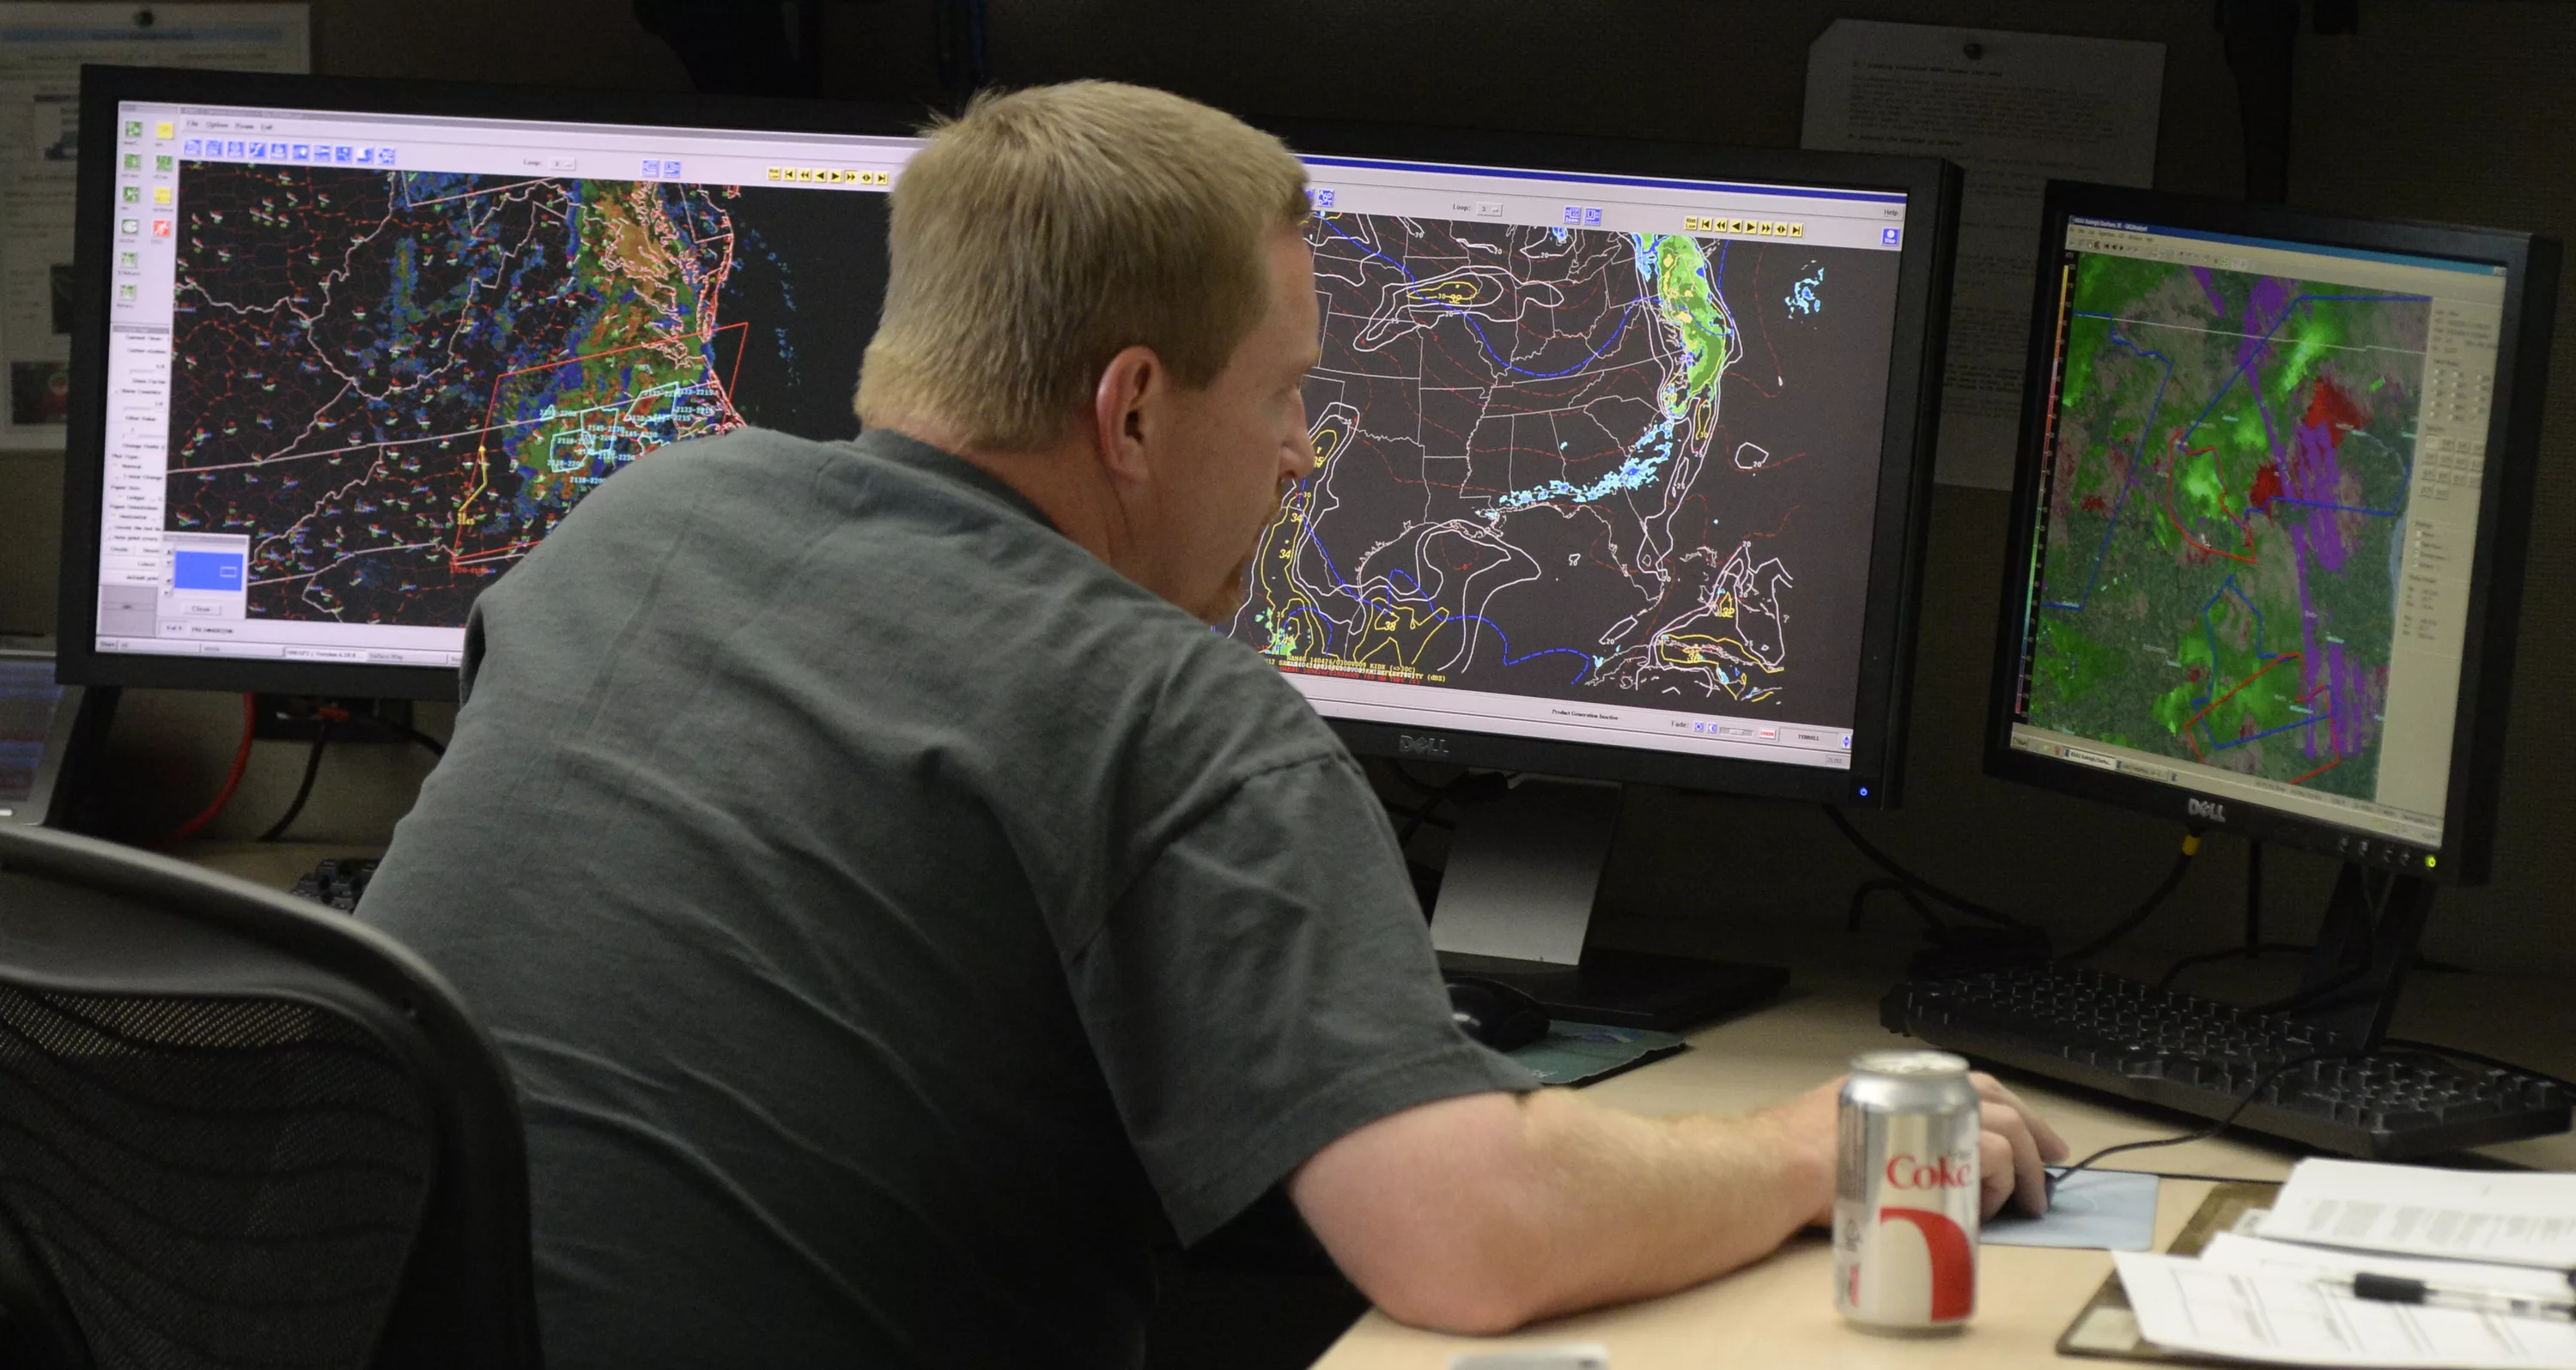 noaa-spc-lead-severe-weather-forecaster-hart-keeps-track-of-the-latest-radar-models-at-the-national-weather-center-in-norman